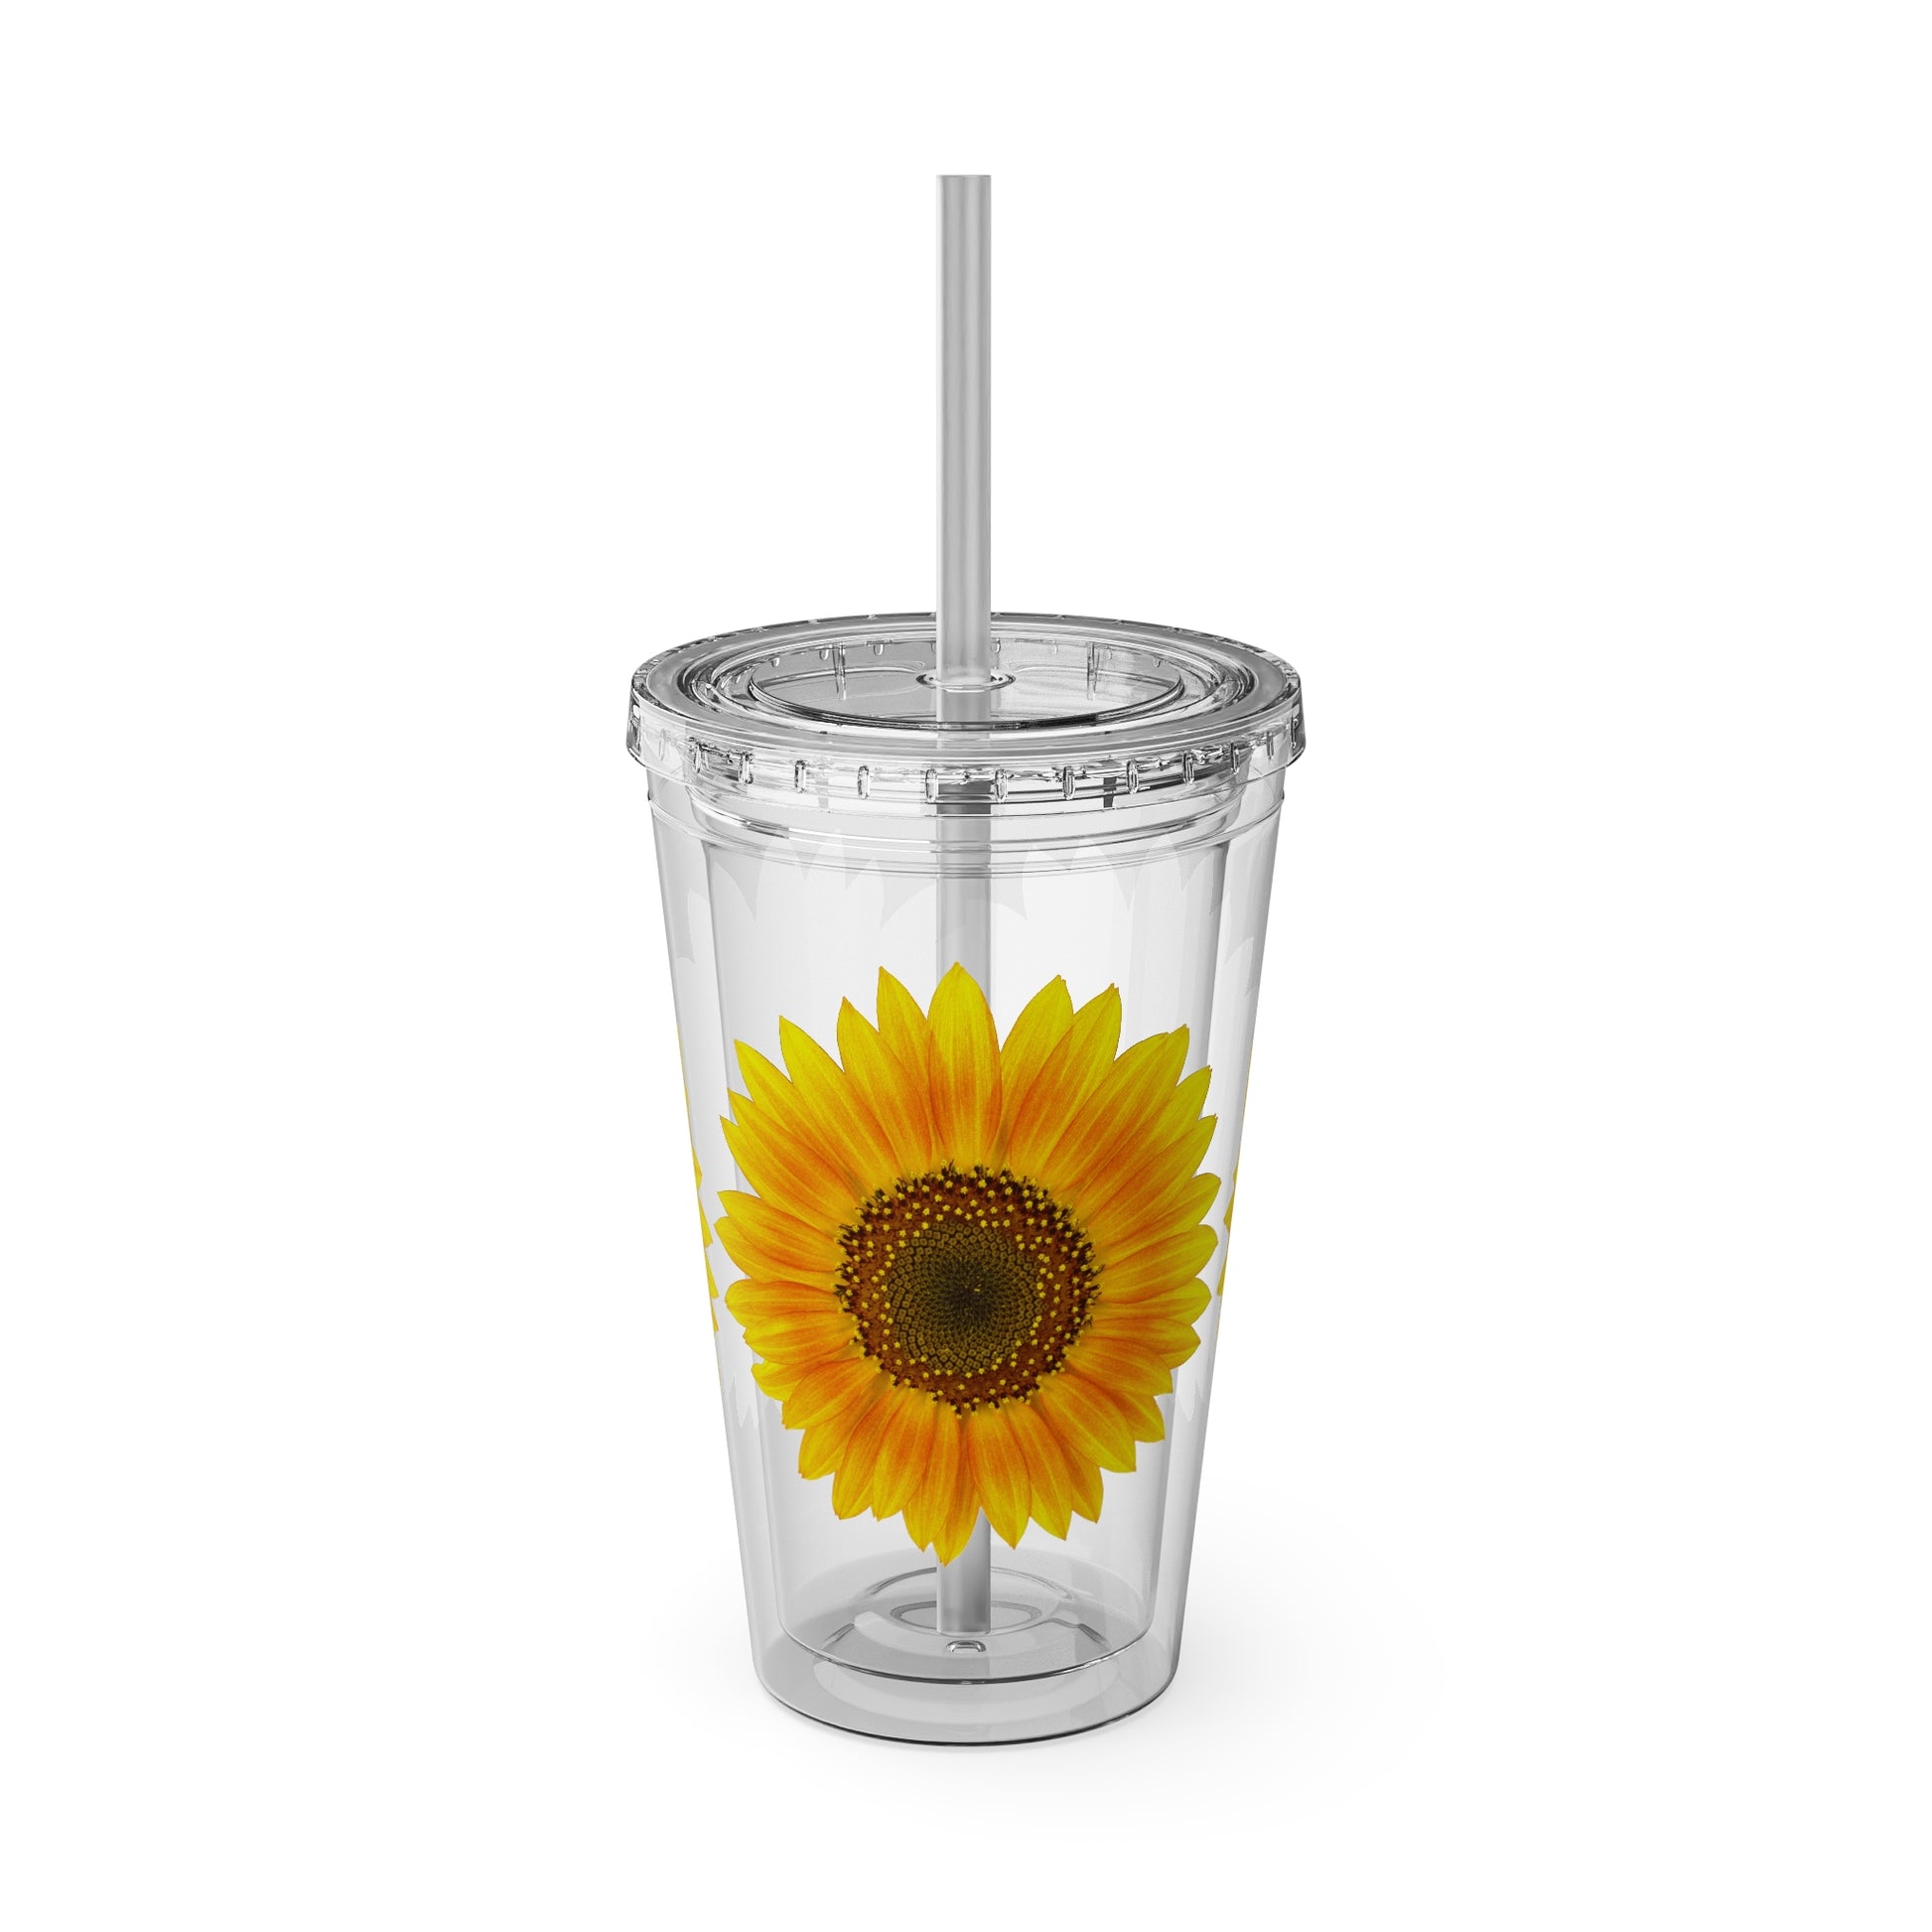 A Printify Golden Sunflower Tumbler with straw and a sunflower.